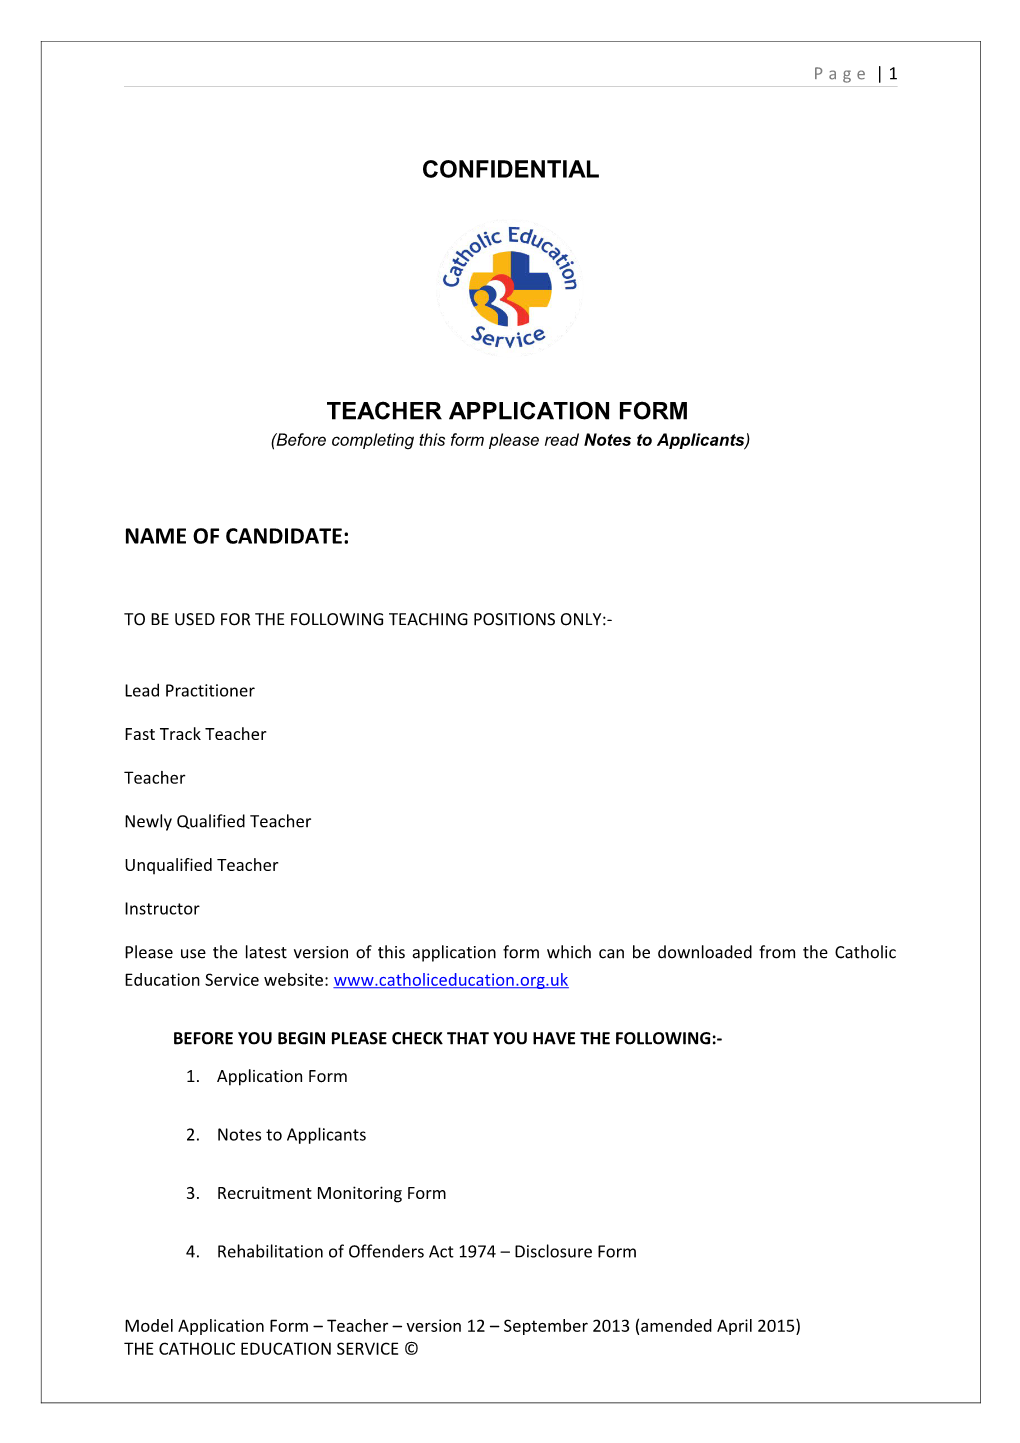 Before Completing This Form Please Read Notes to Applicants